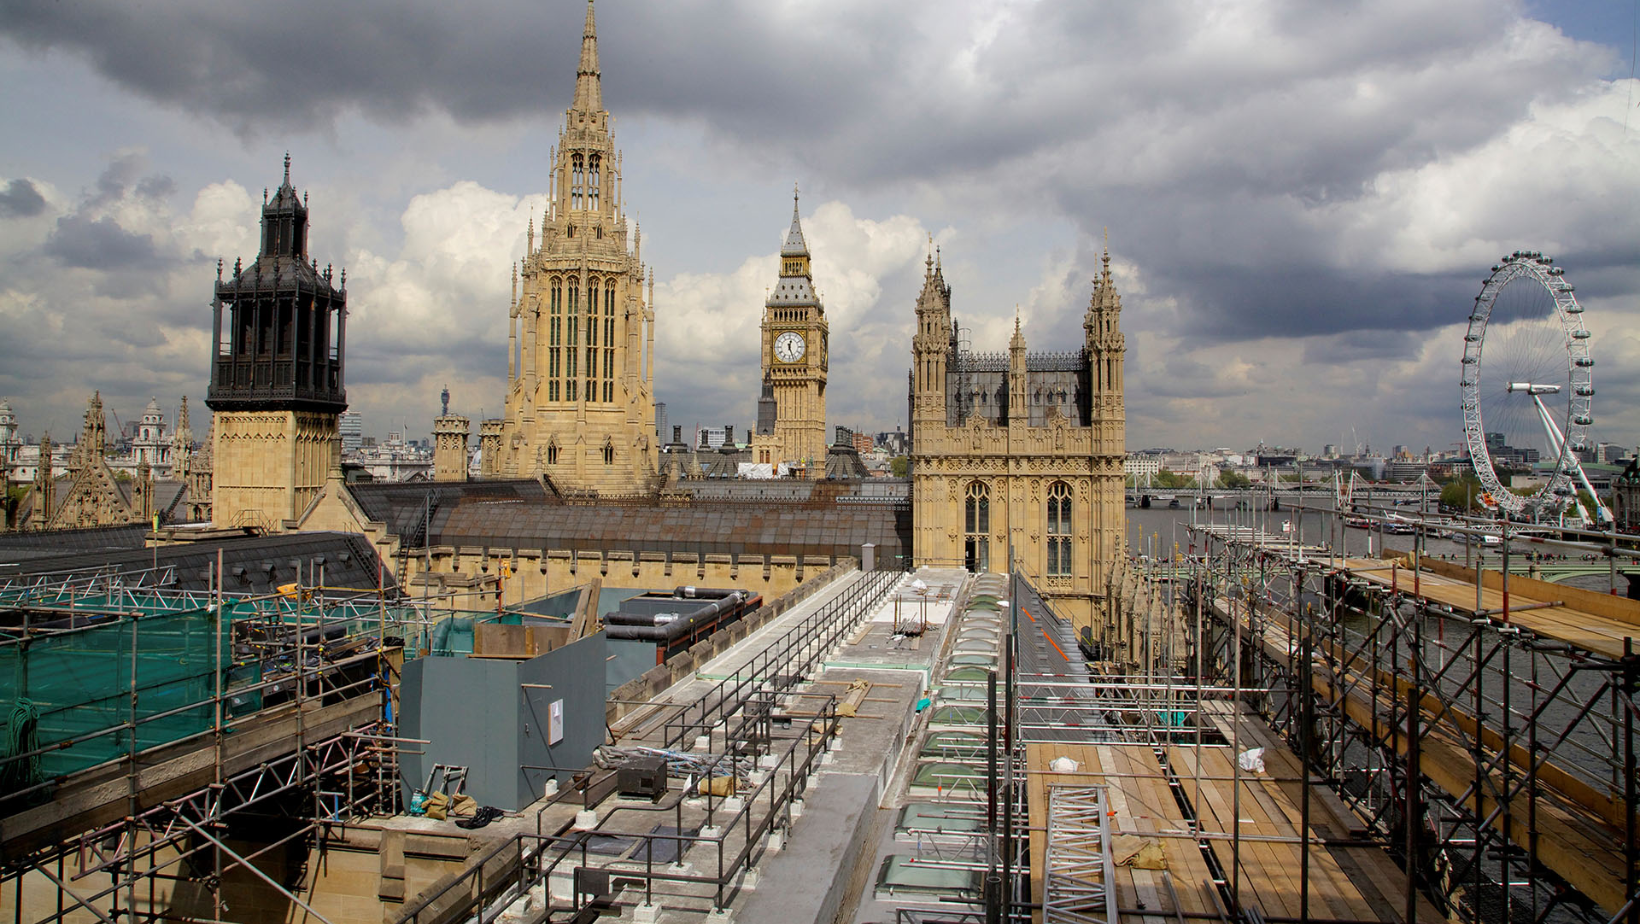 scaffolding on the Houses of Parliament